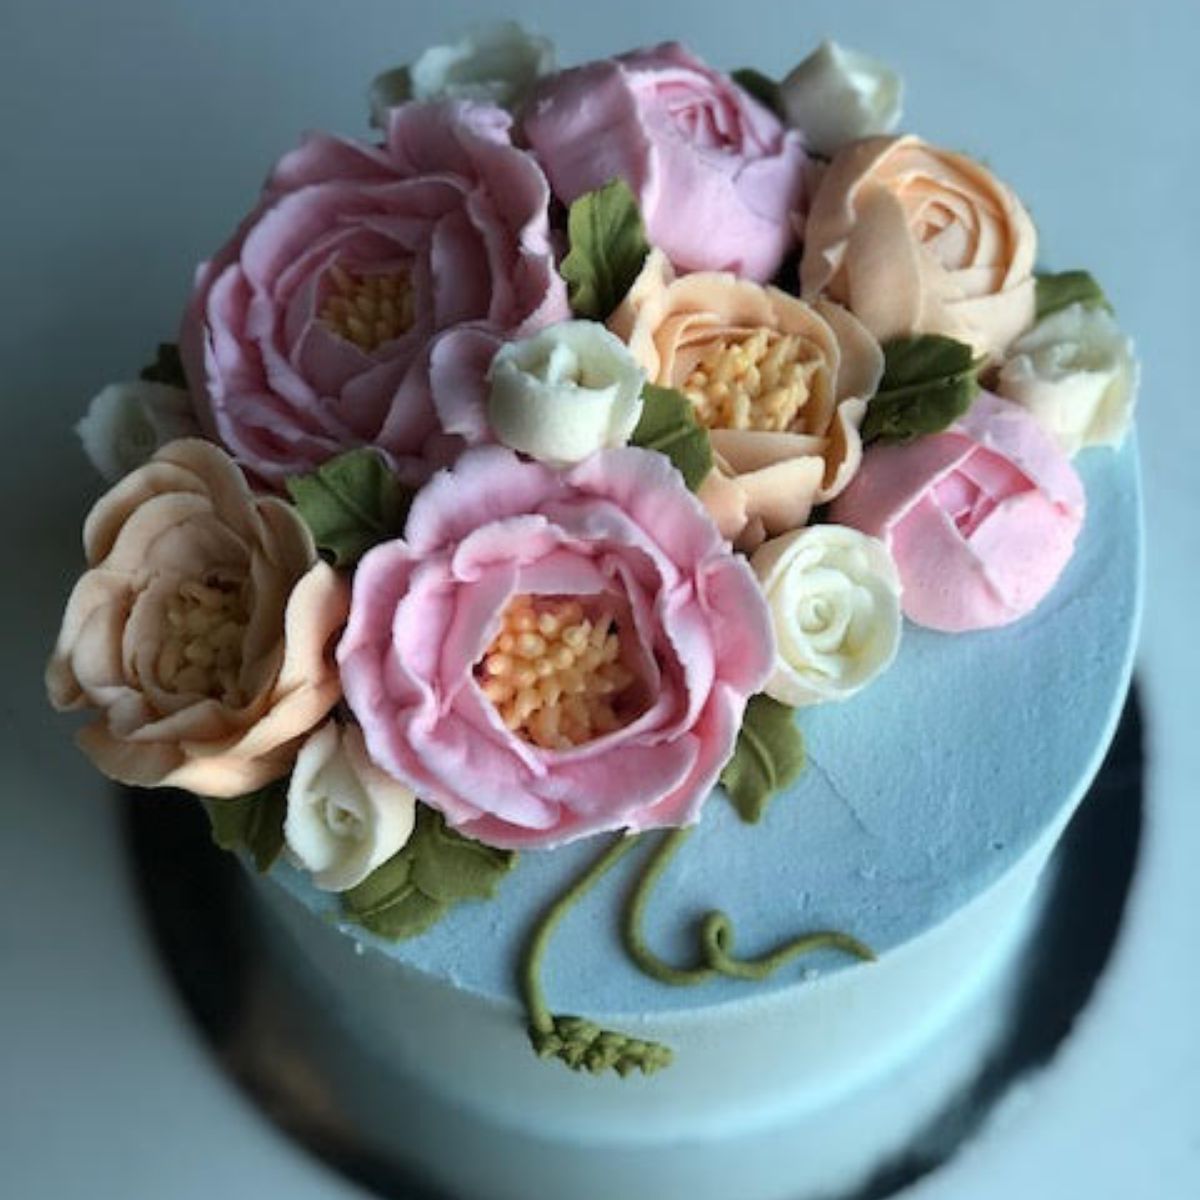 Cakes & Flowers Sydney Delivery